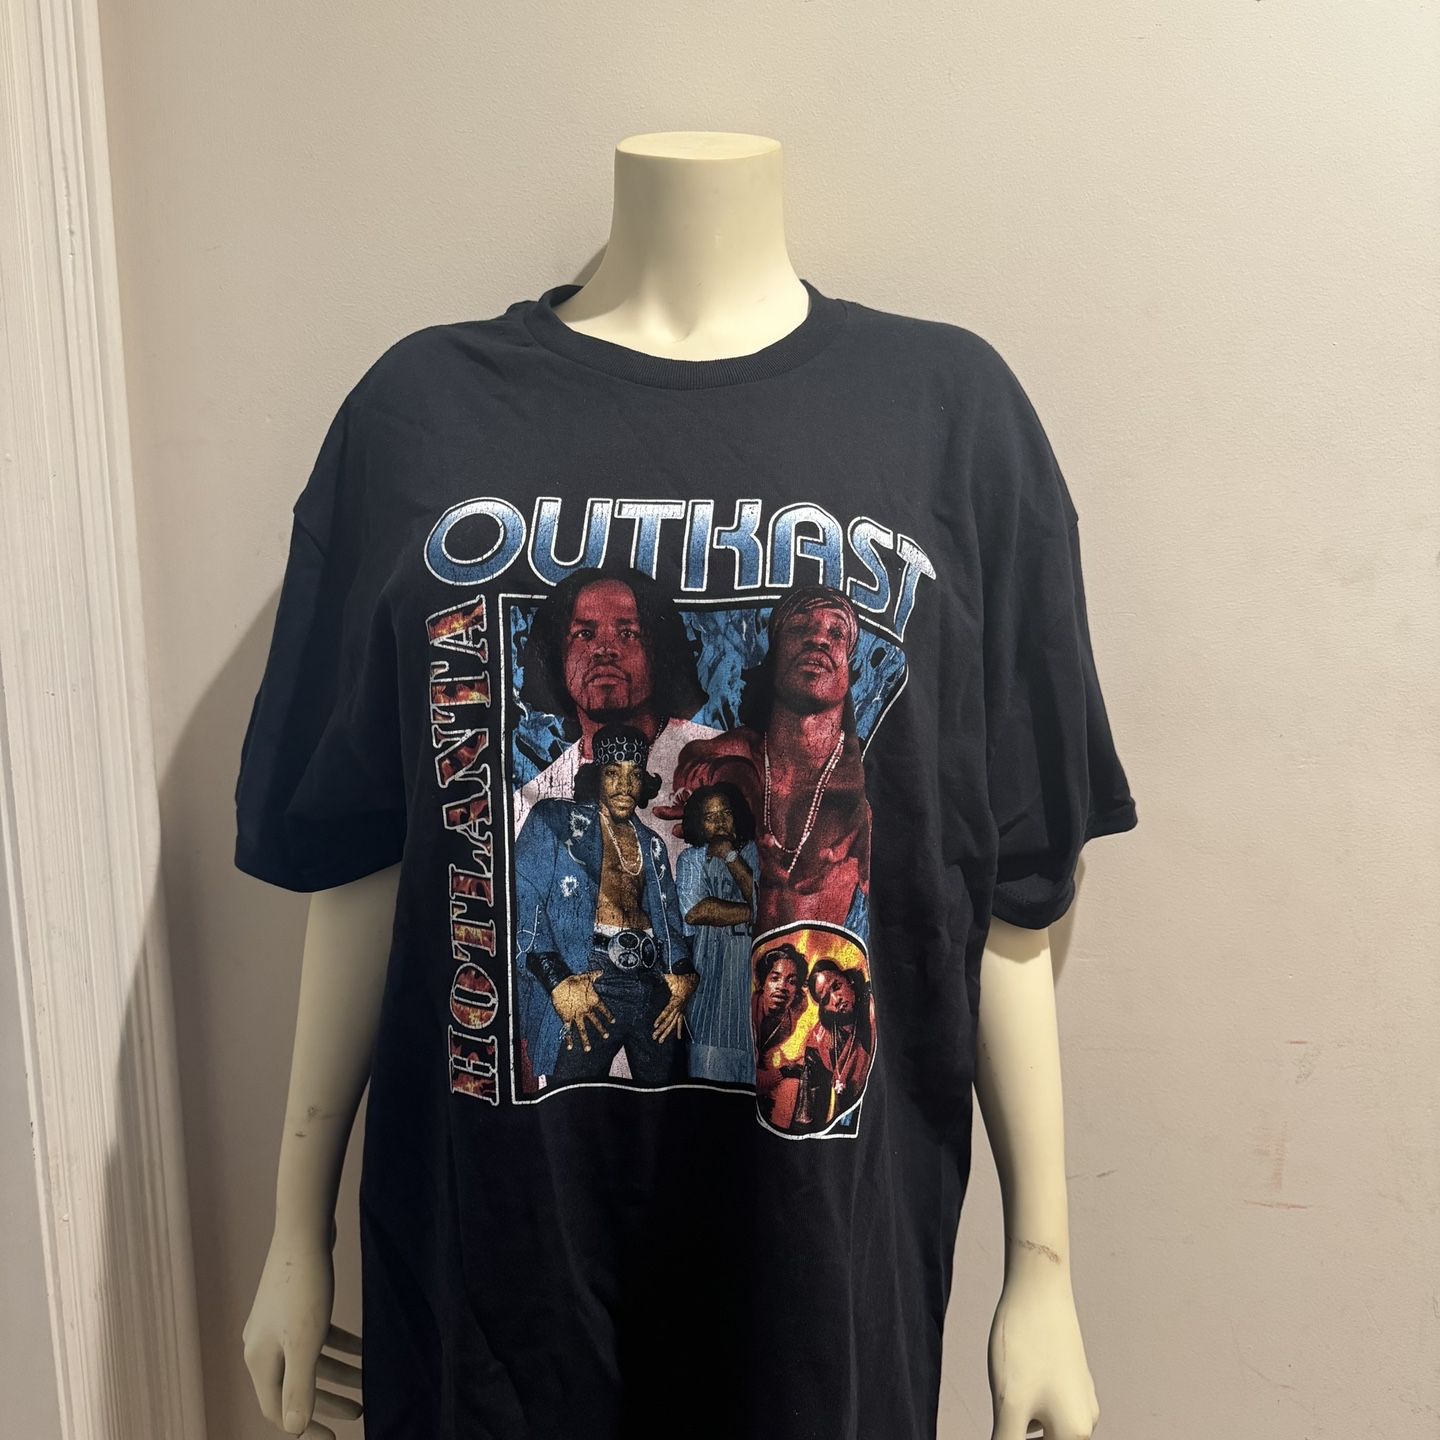 OUTKAST MERCH OF YOUR DREAMS LIMITED EDITION 